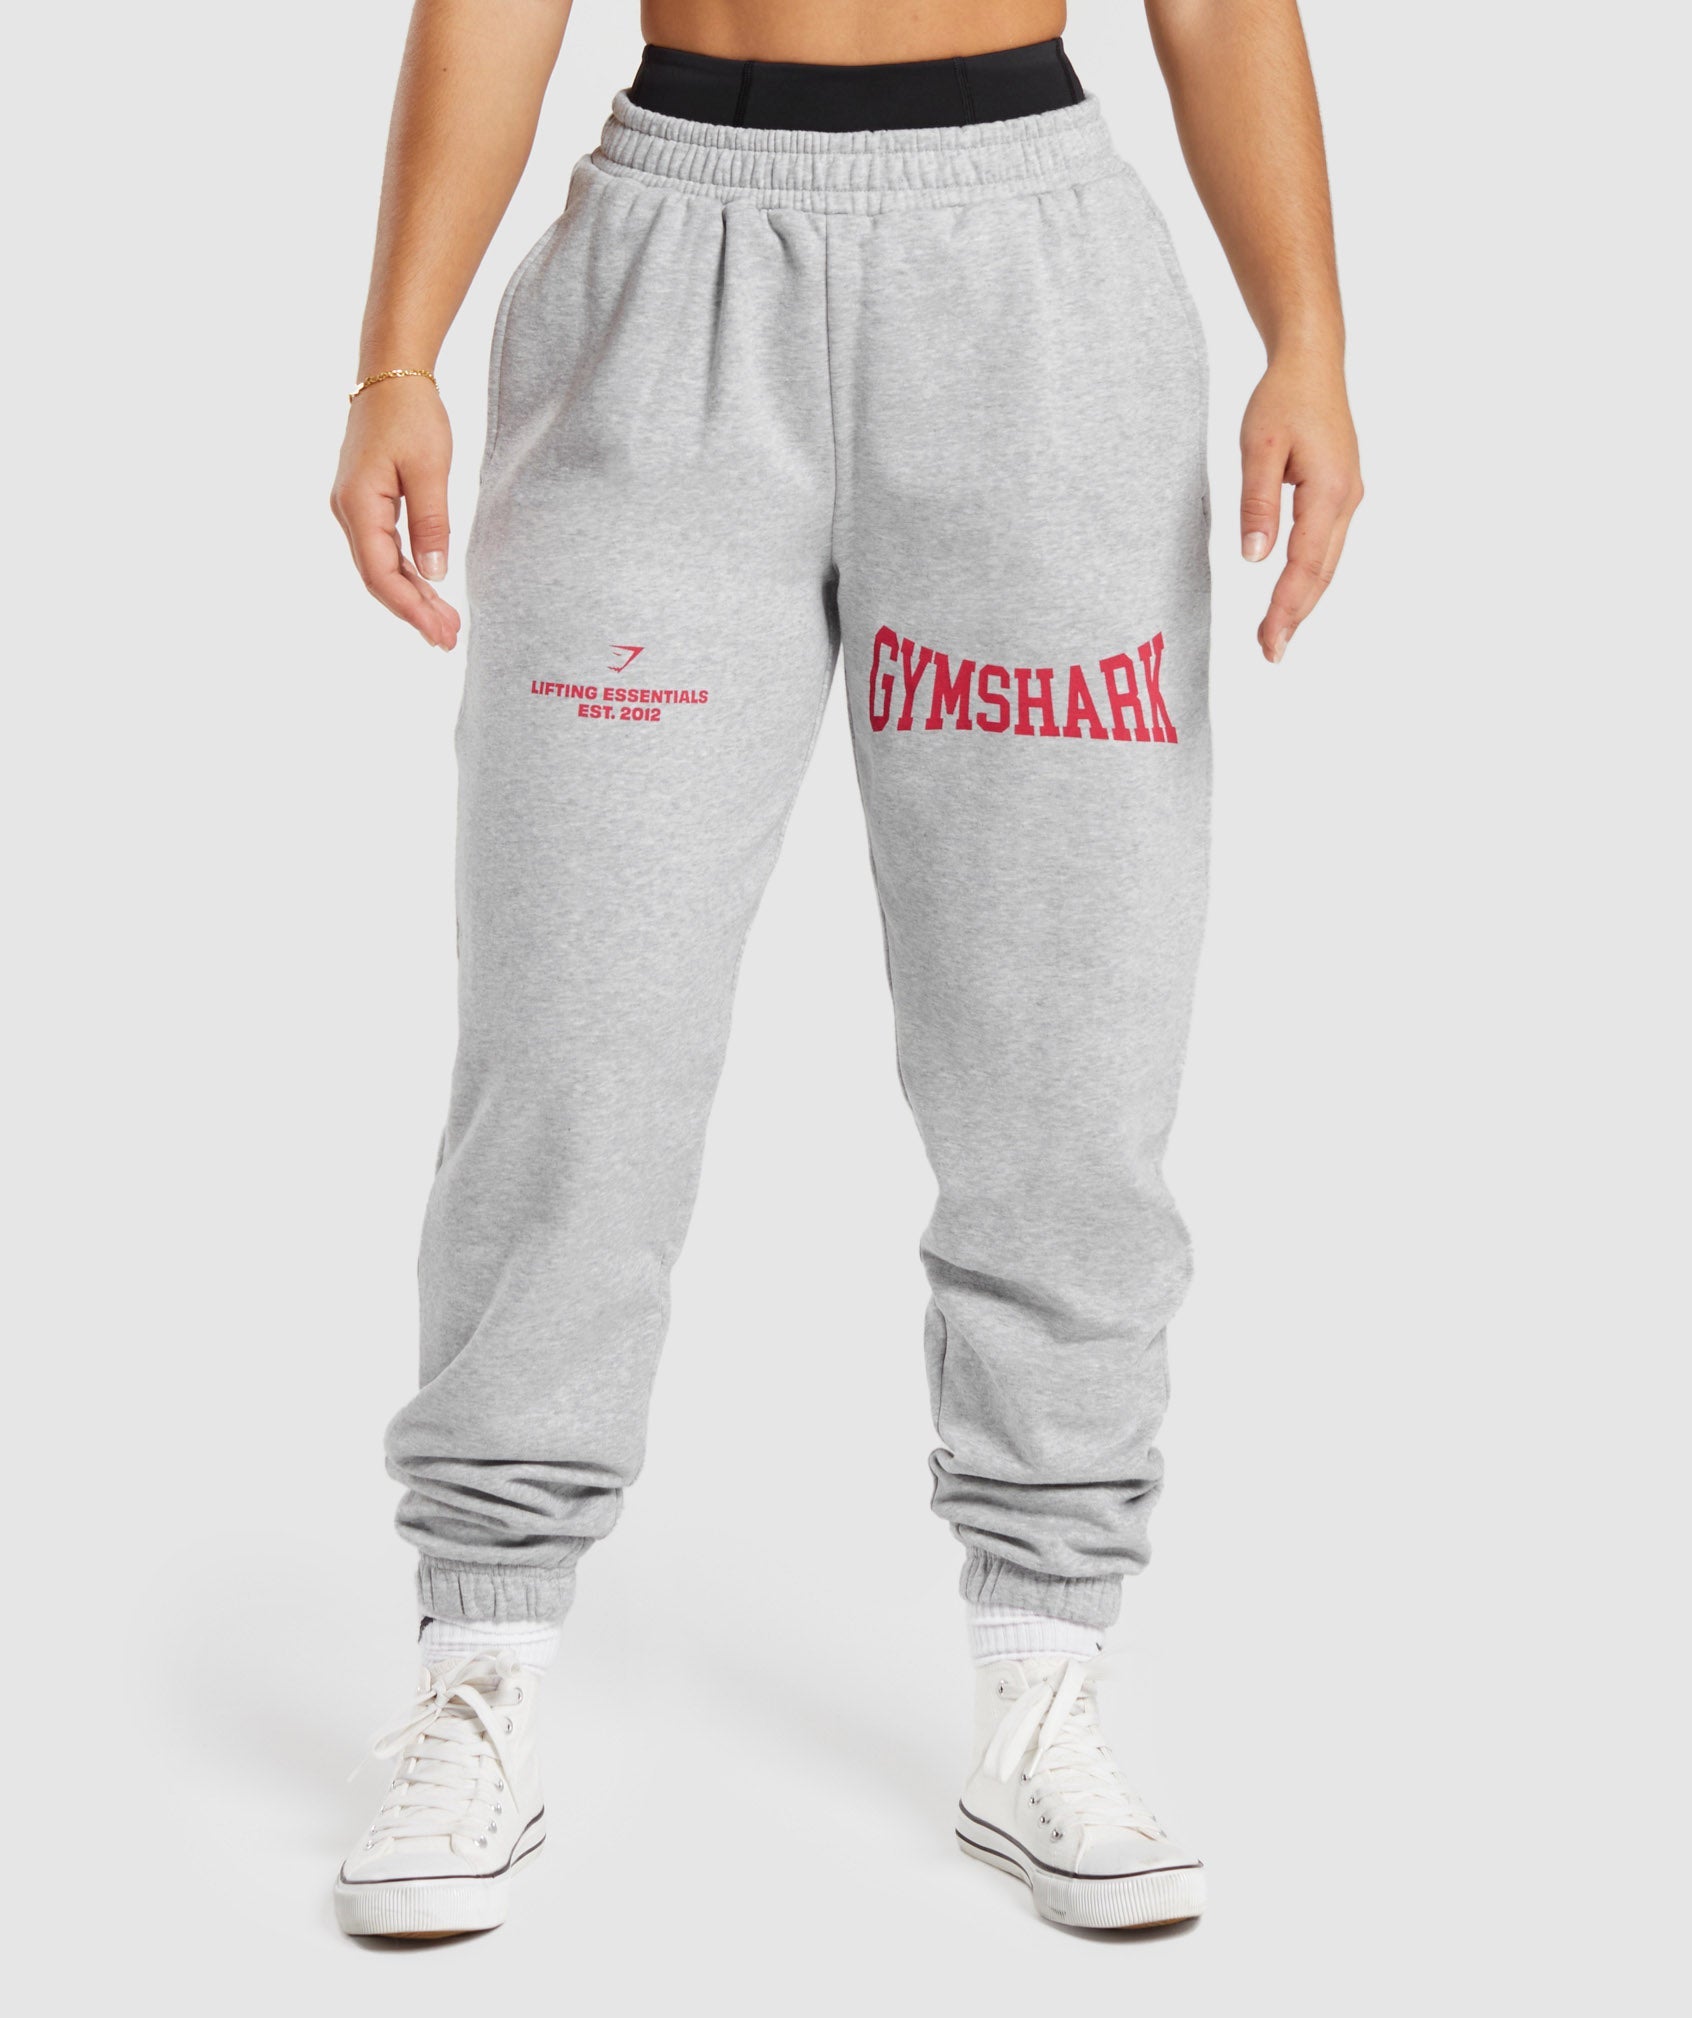 Gymshark Lifting Essentials Graphic Joggers - Light Grey Core Marl